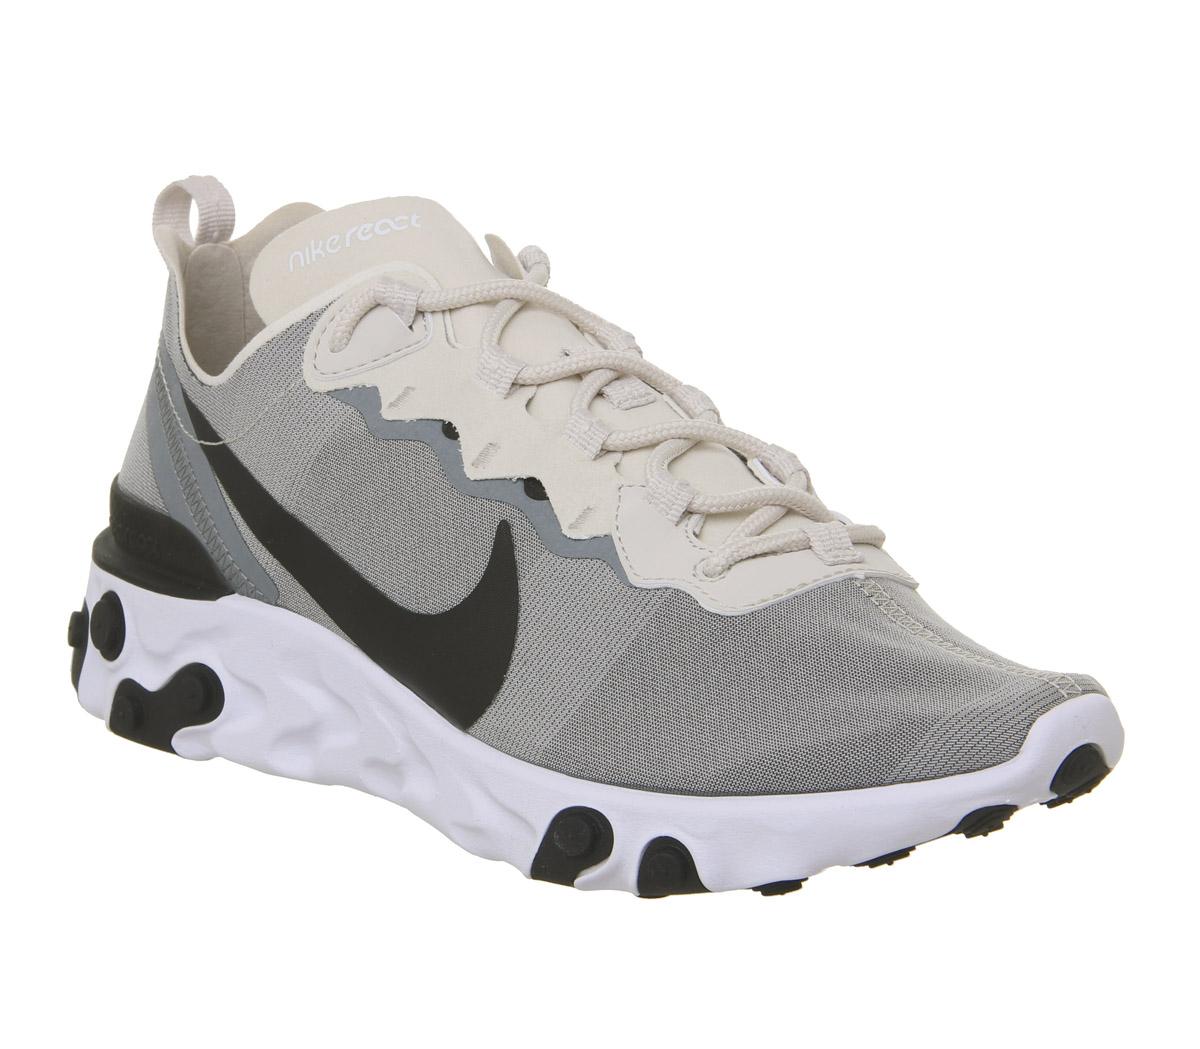 Nike React Element 55 Trainers Light Orewood Brown - Men's Trainers